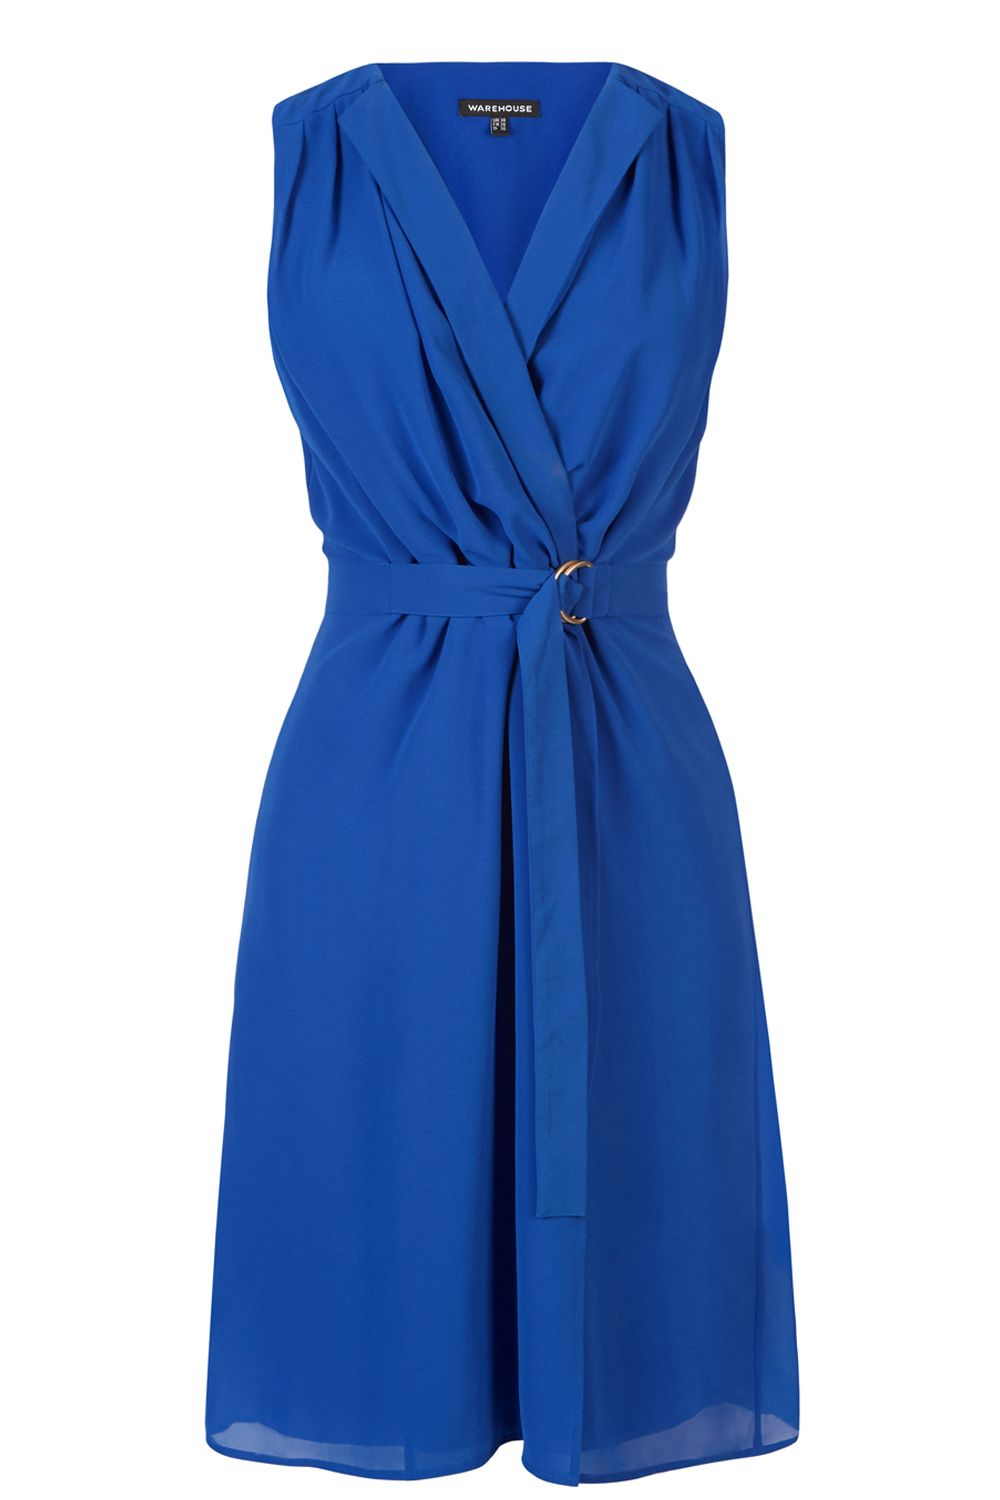 Warehouse Open Collar D Ring Dress in Blue (Bright Blue) | Lyst